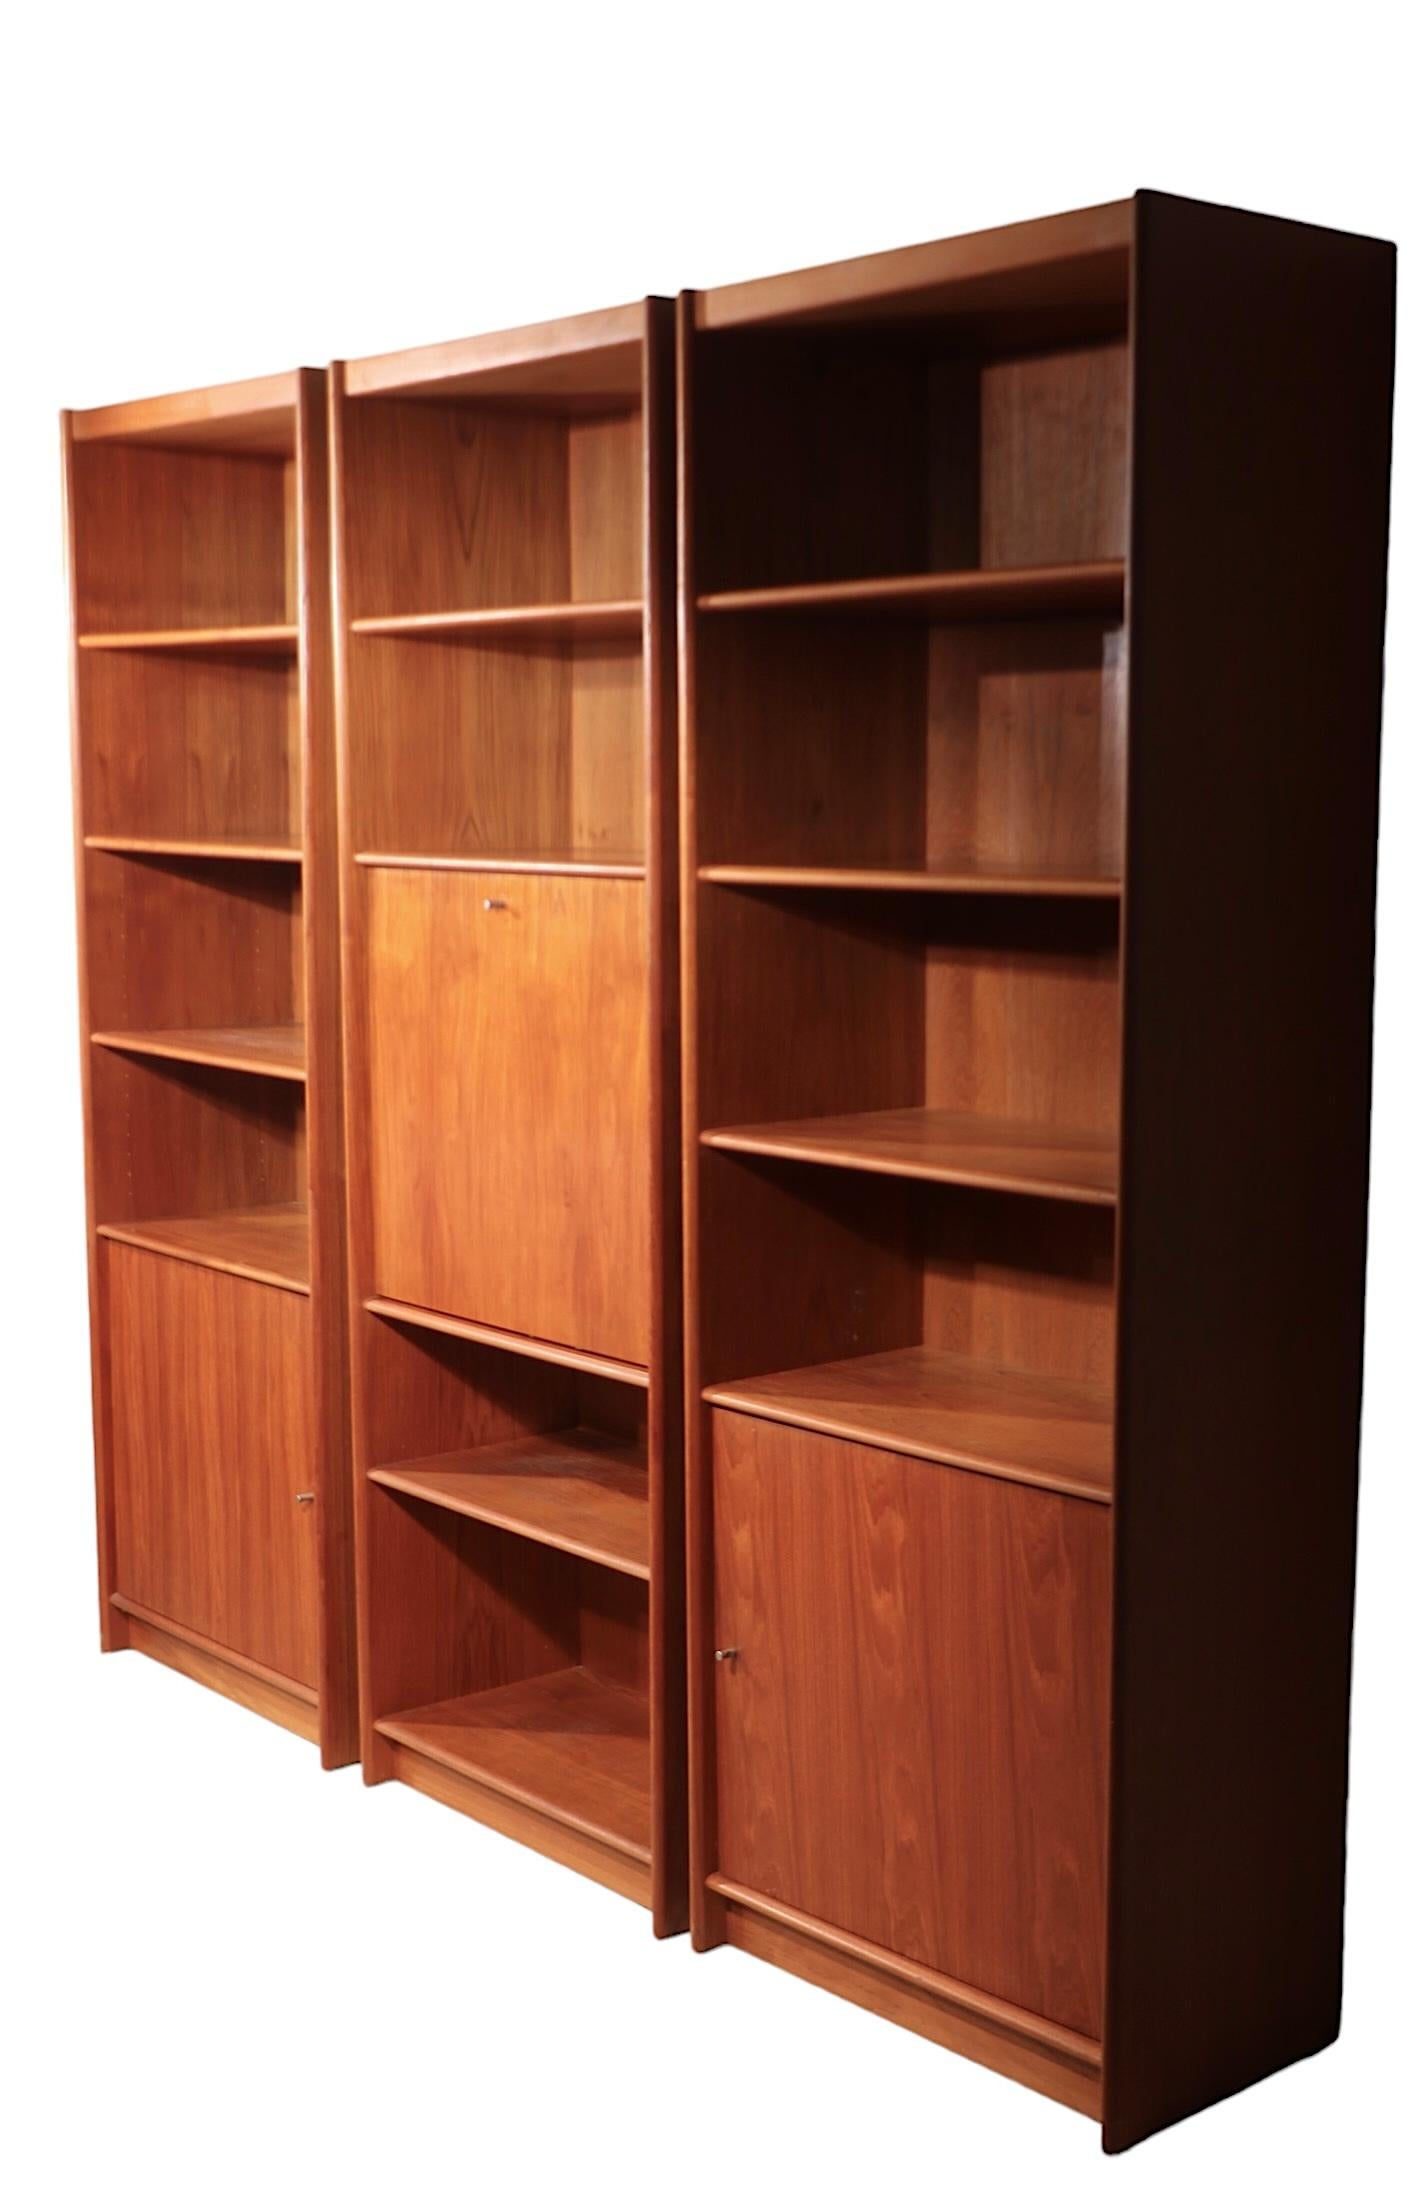 Danish Mid Century Teak Modern Modular Wall Unit Bookcase c. 1950/60's In Good Condition For Sale In New York, NY